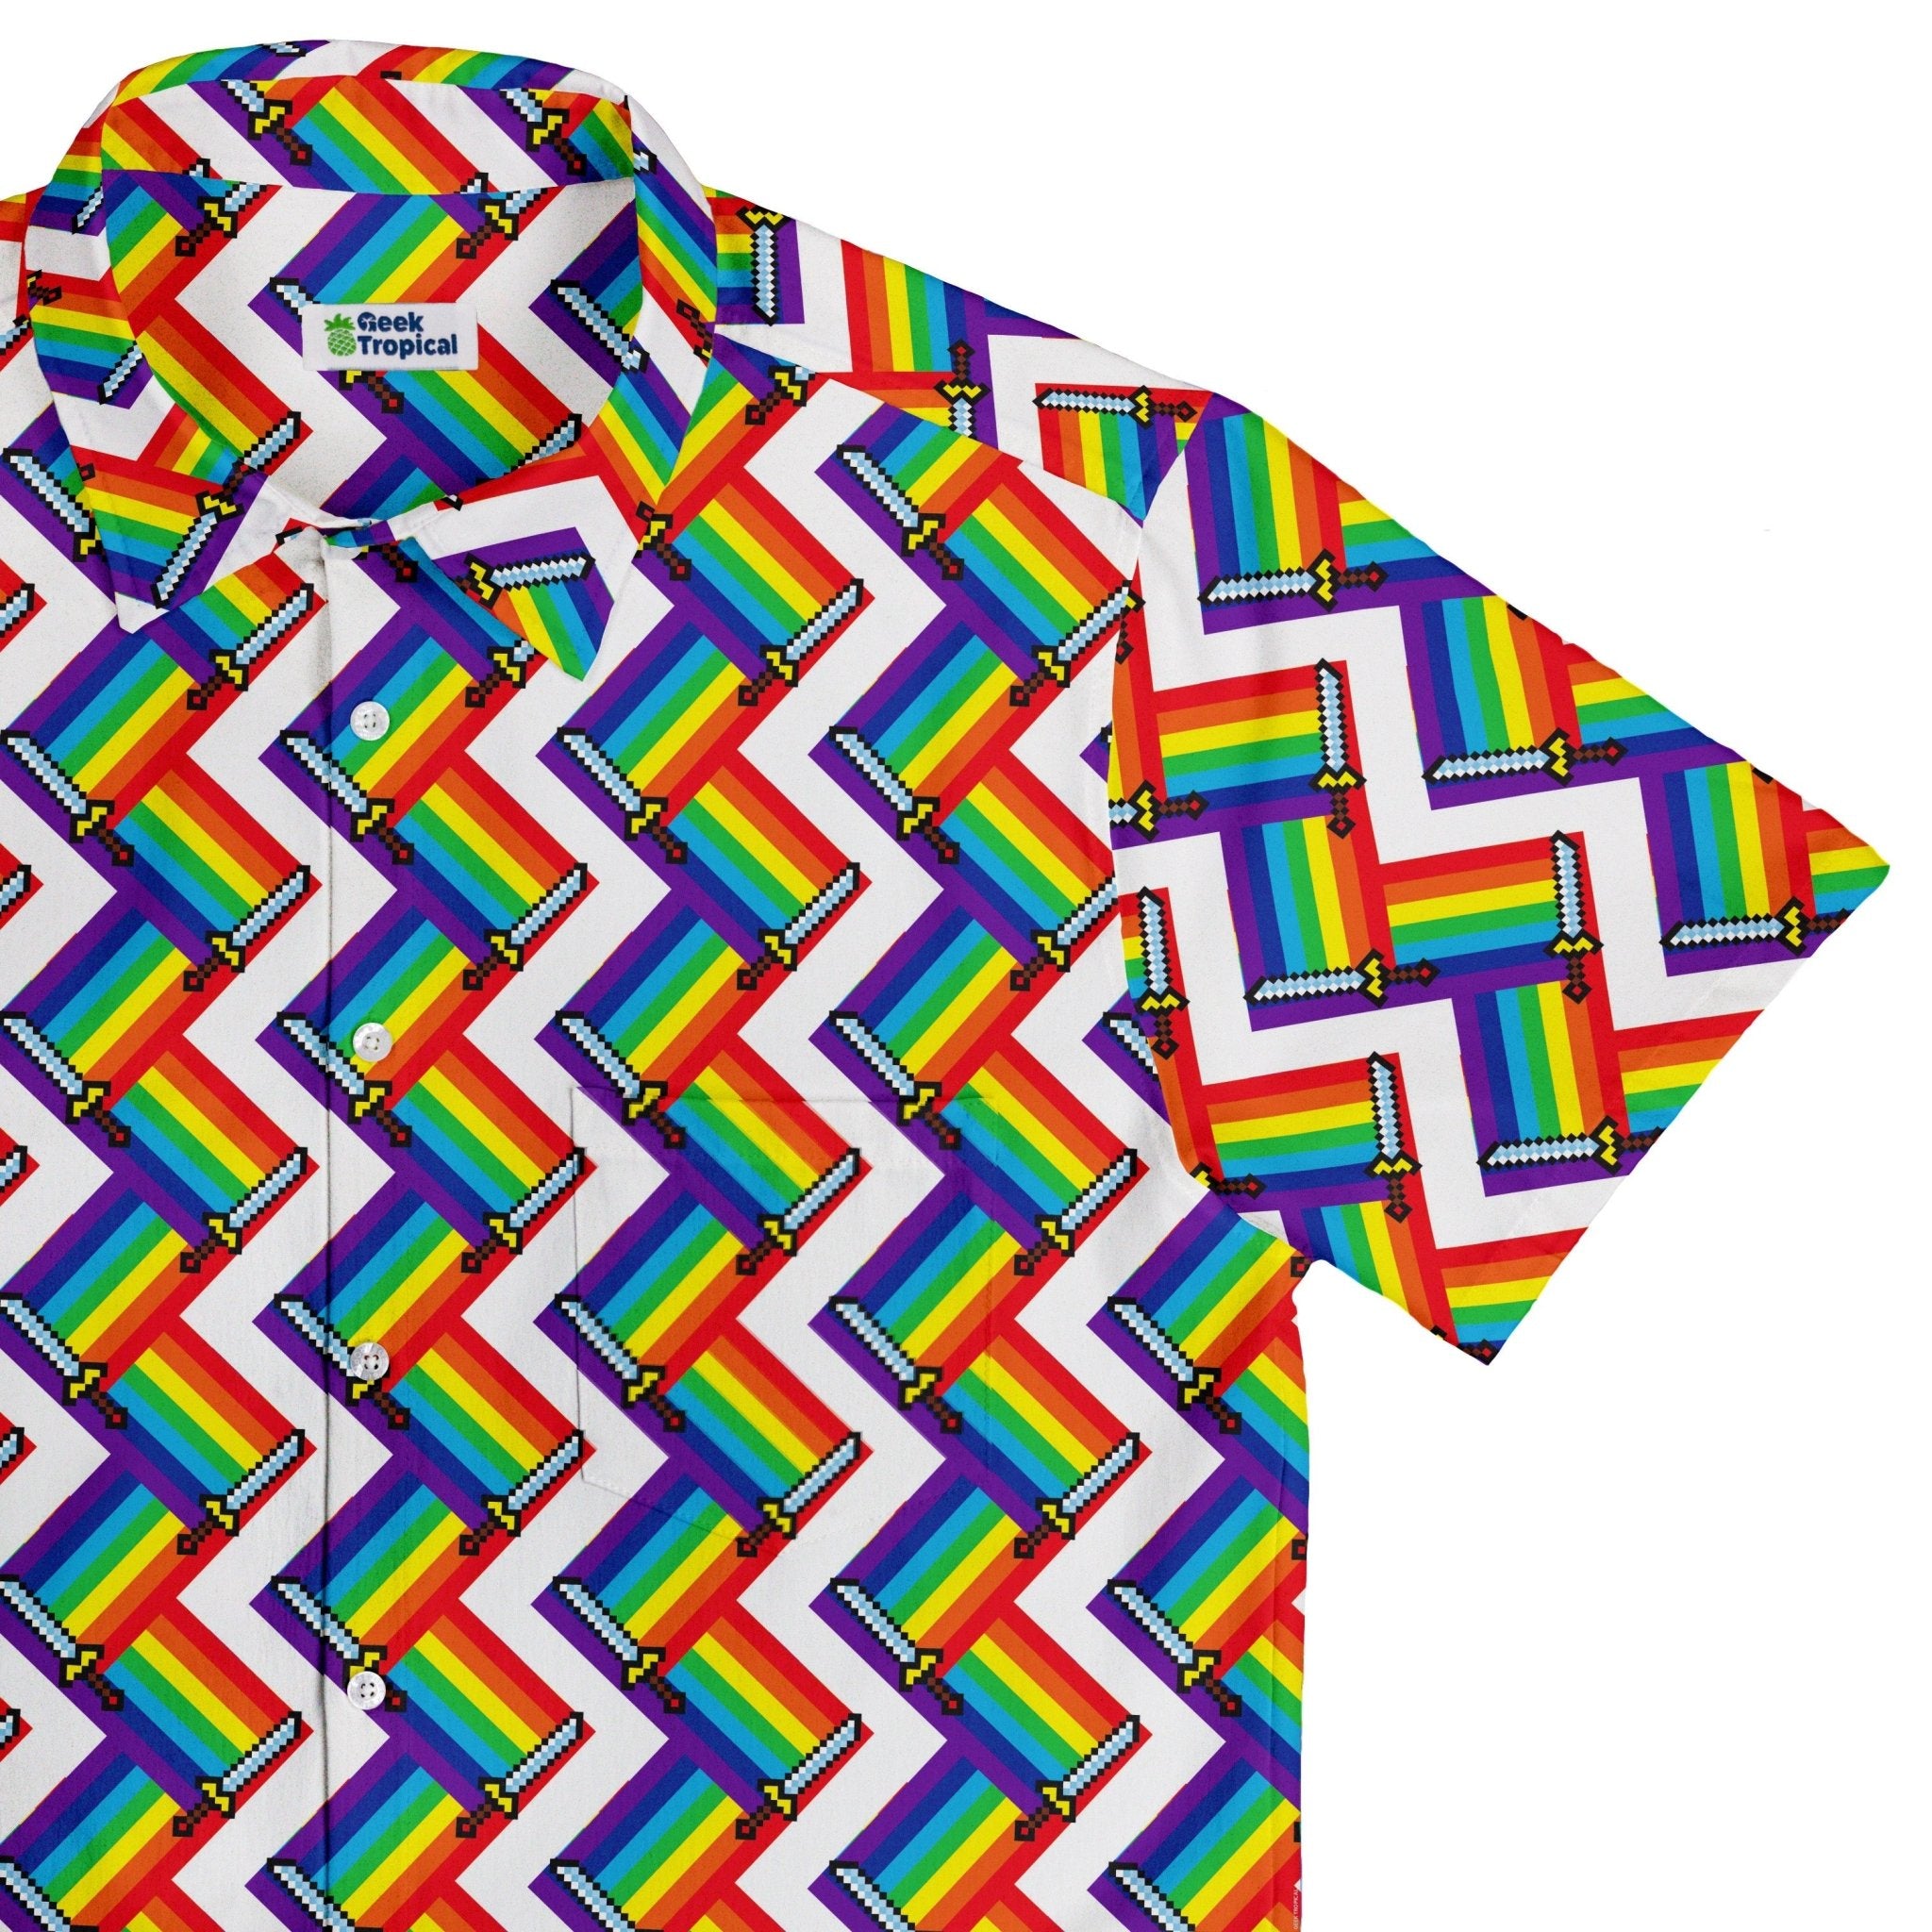 Video Game Swords Rainbow LGBTQ+ Pride Button Up Shirt - adult sizing - Design by Heather Davenport - Pride Patterns